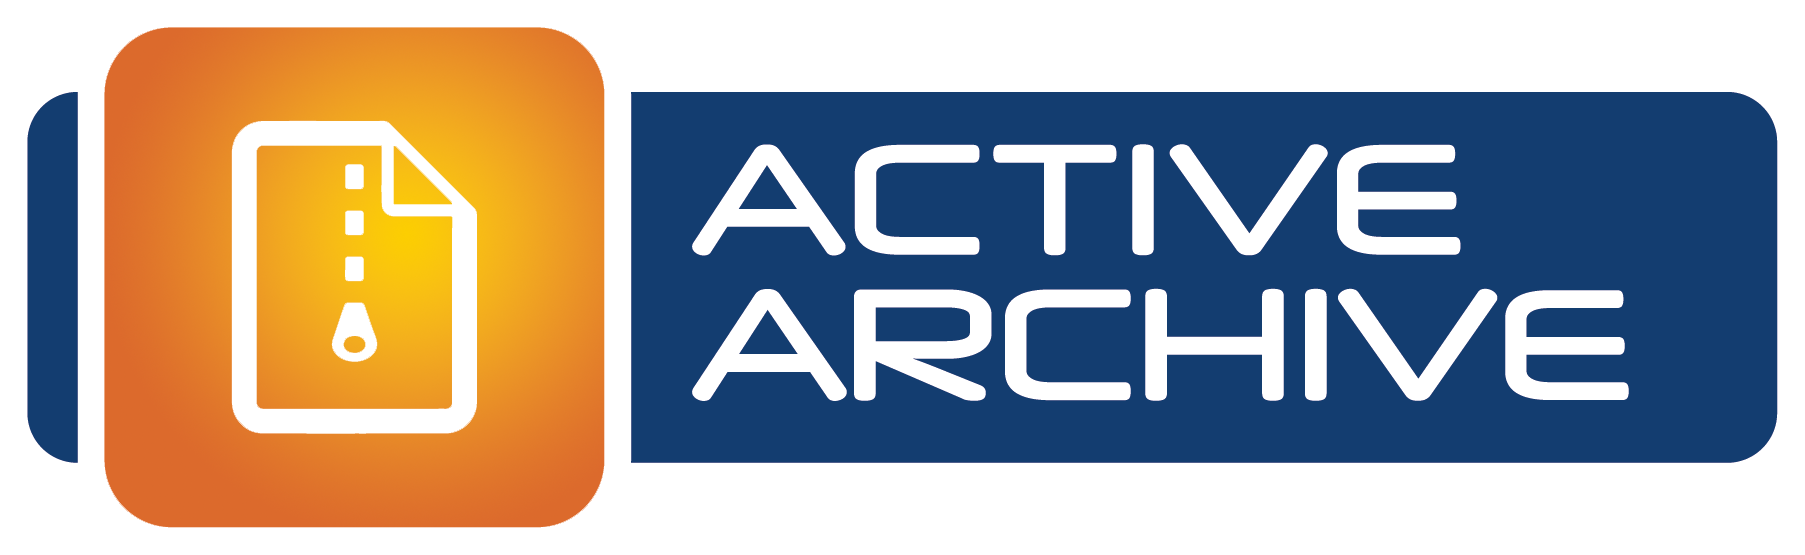 BCC ActiveArchive product logo